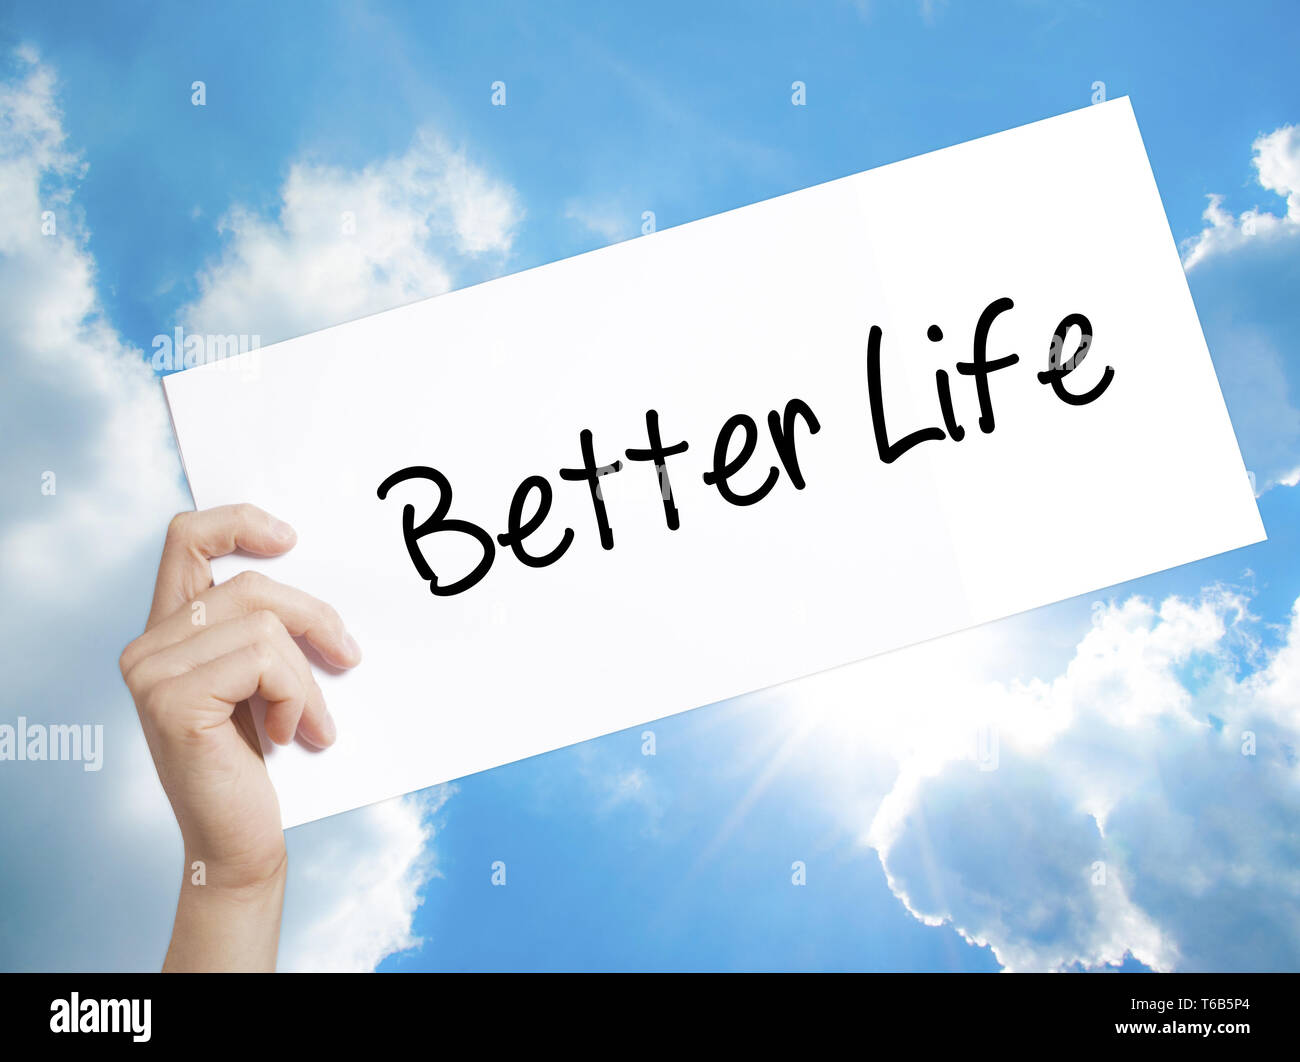 Better Life Sign on white paper. Man Hand Holding Paper with text. Isolated on sky background. Stock Photo